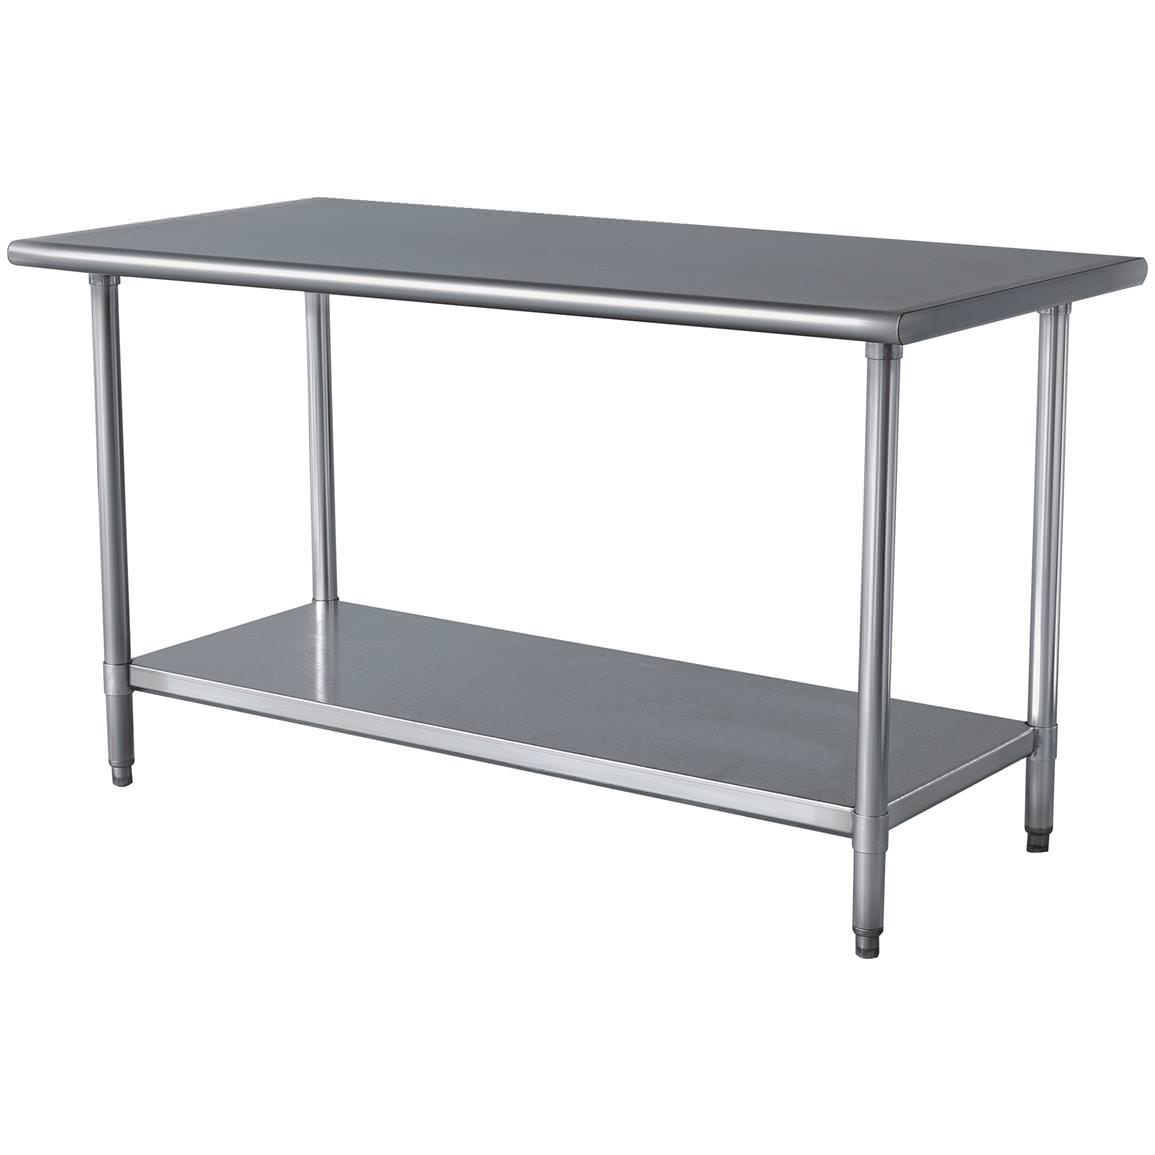 Cheap Stainless Steel Tables